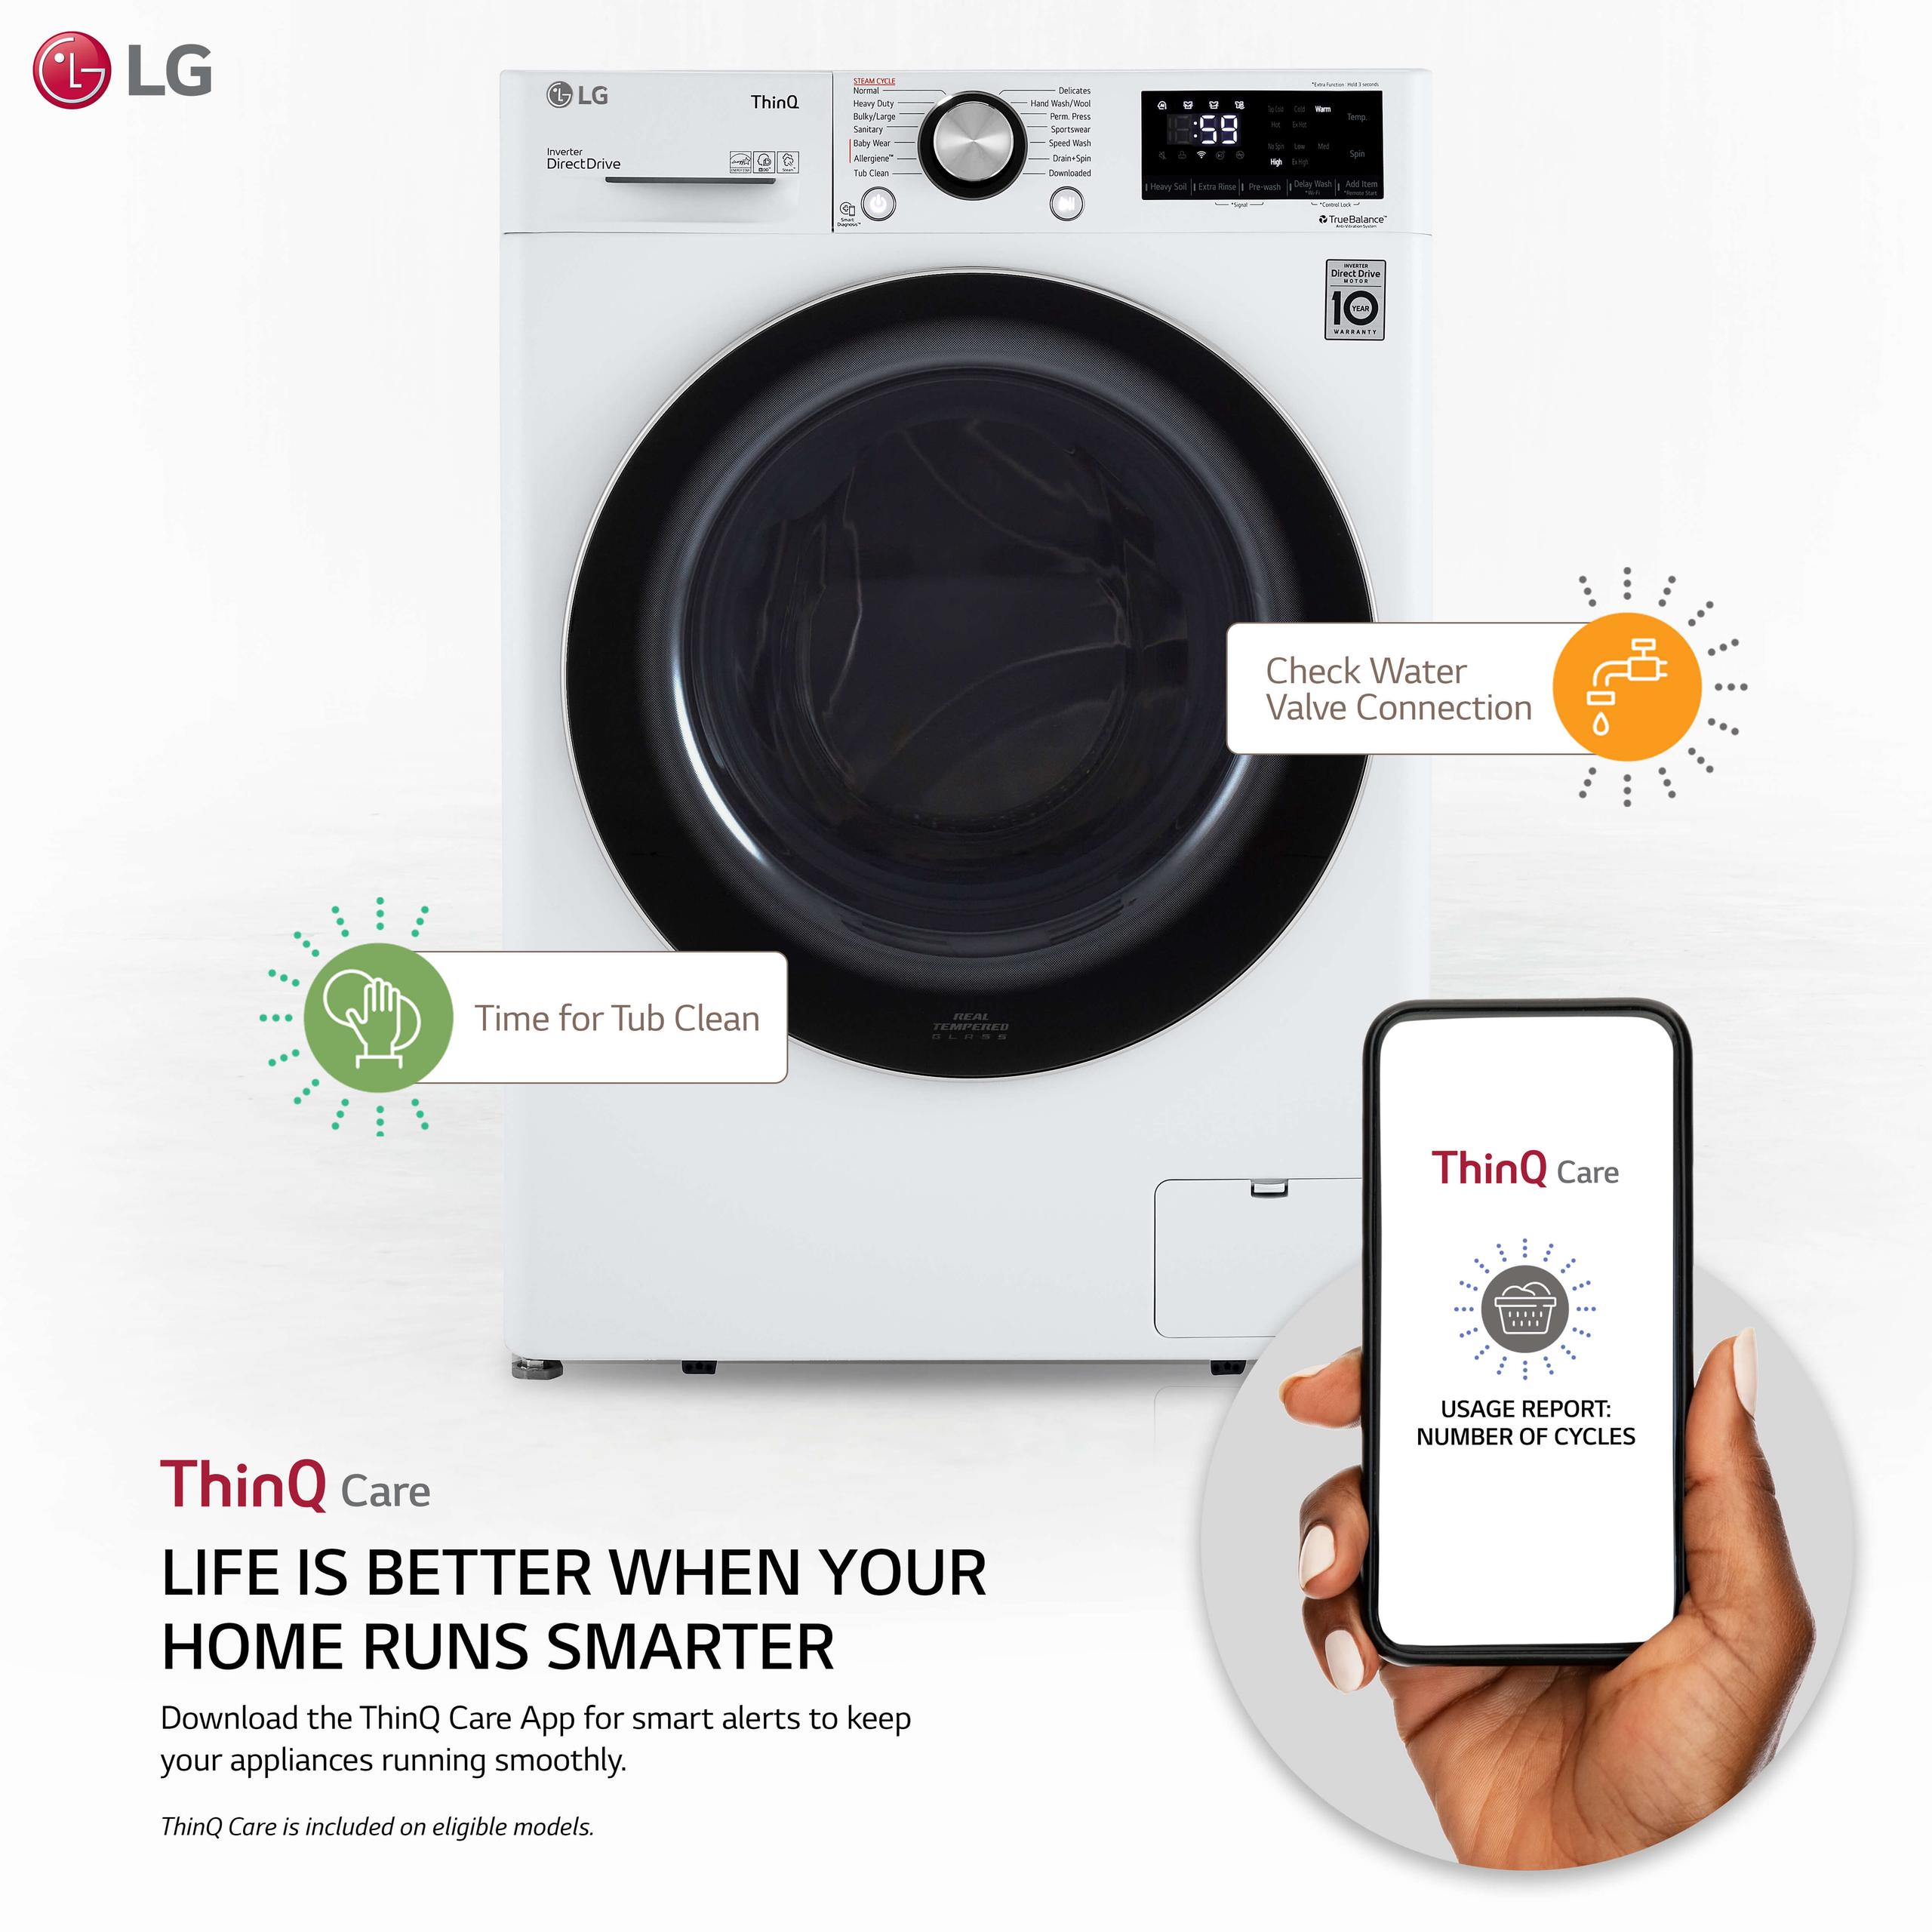 LG WM1455HWA 2.4 Cu. Ft. HE Stackable Front Load Washer with Steam Wash - White - image 2 of 5